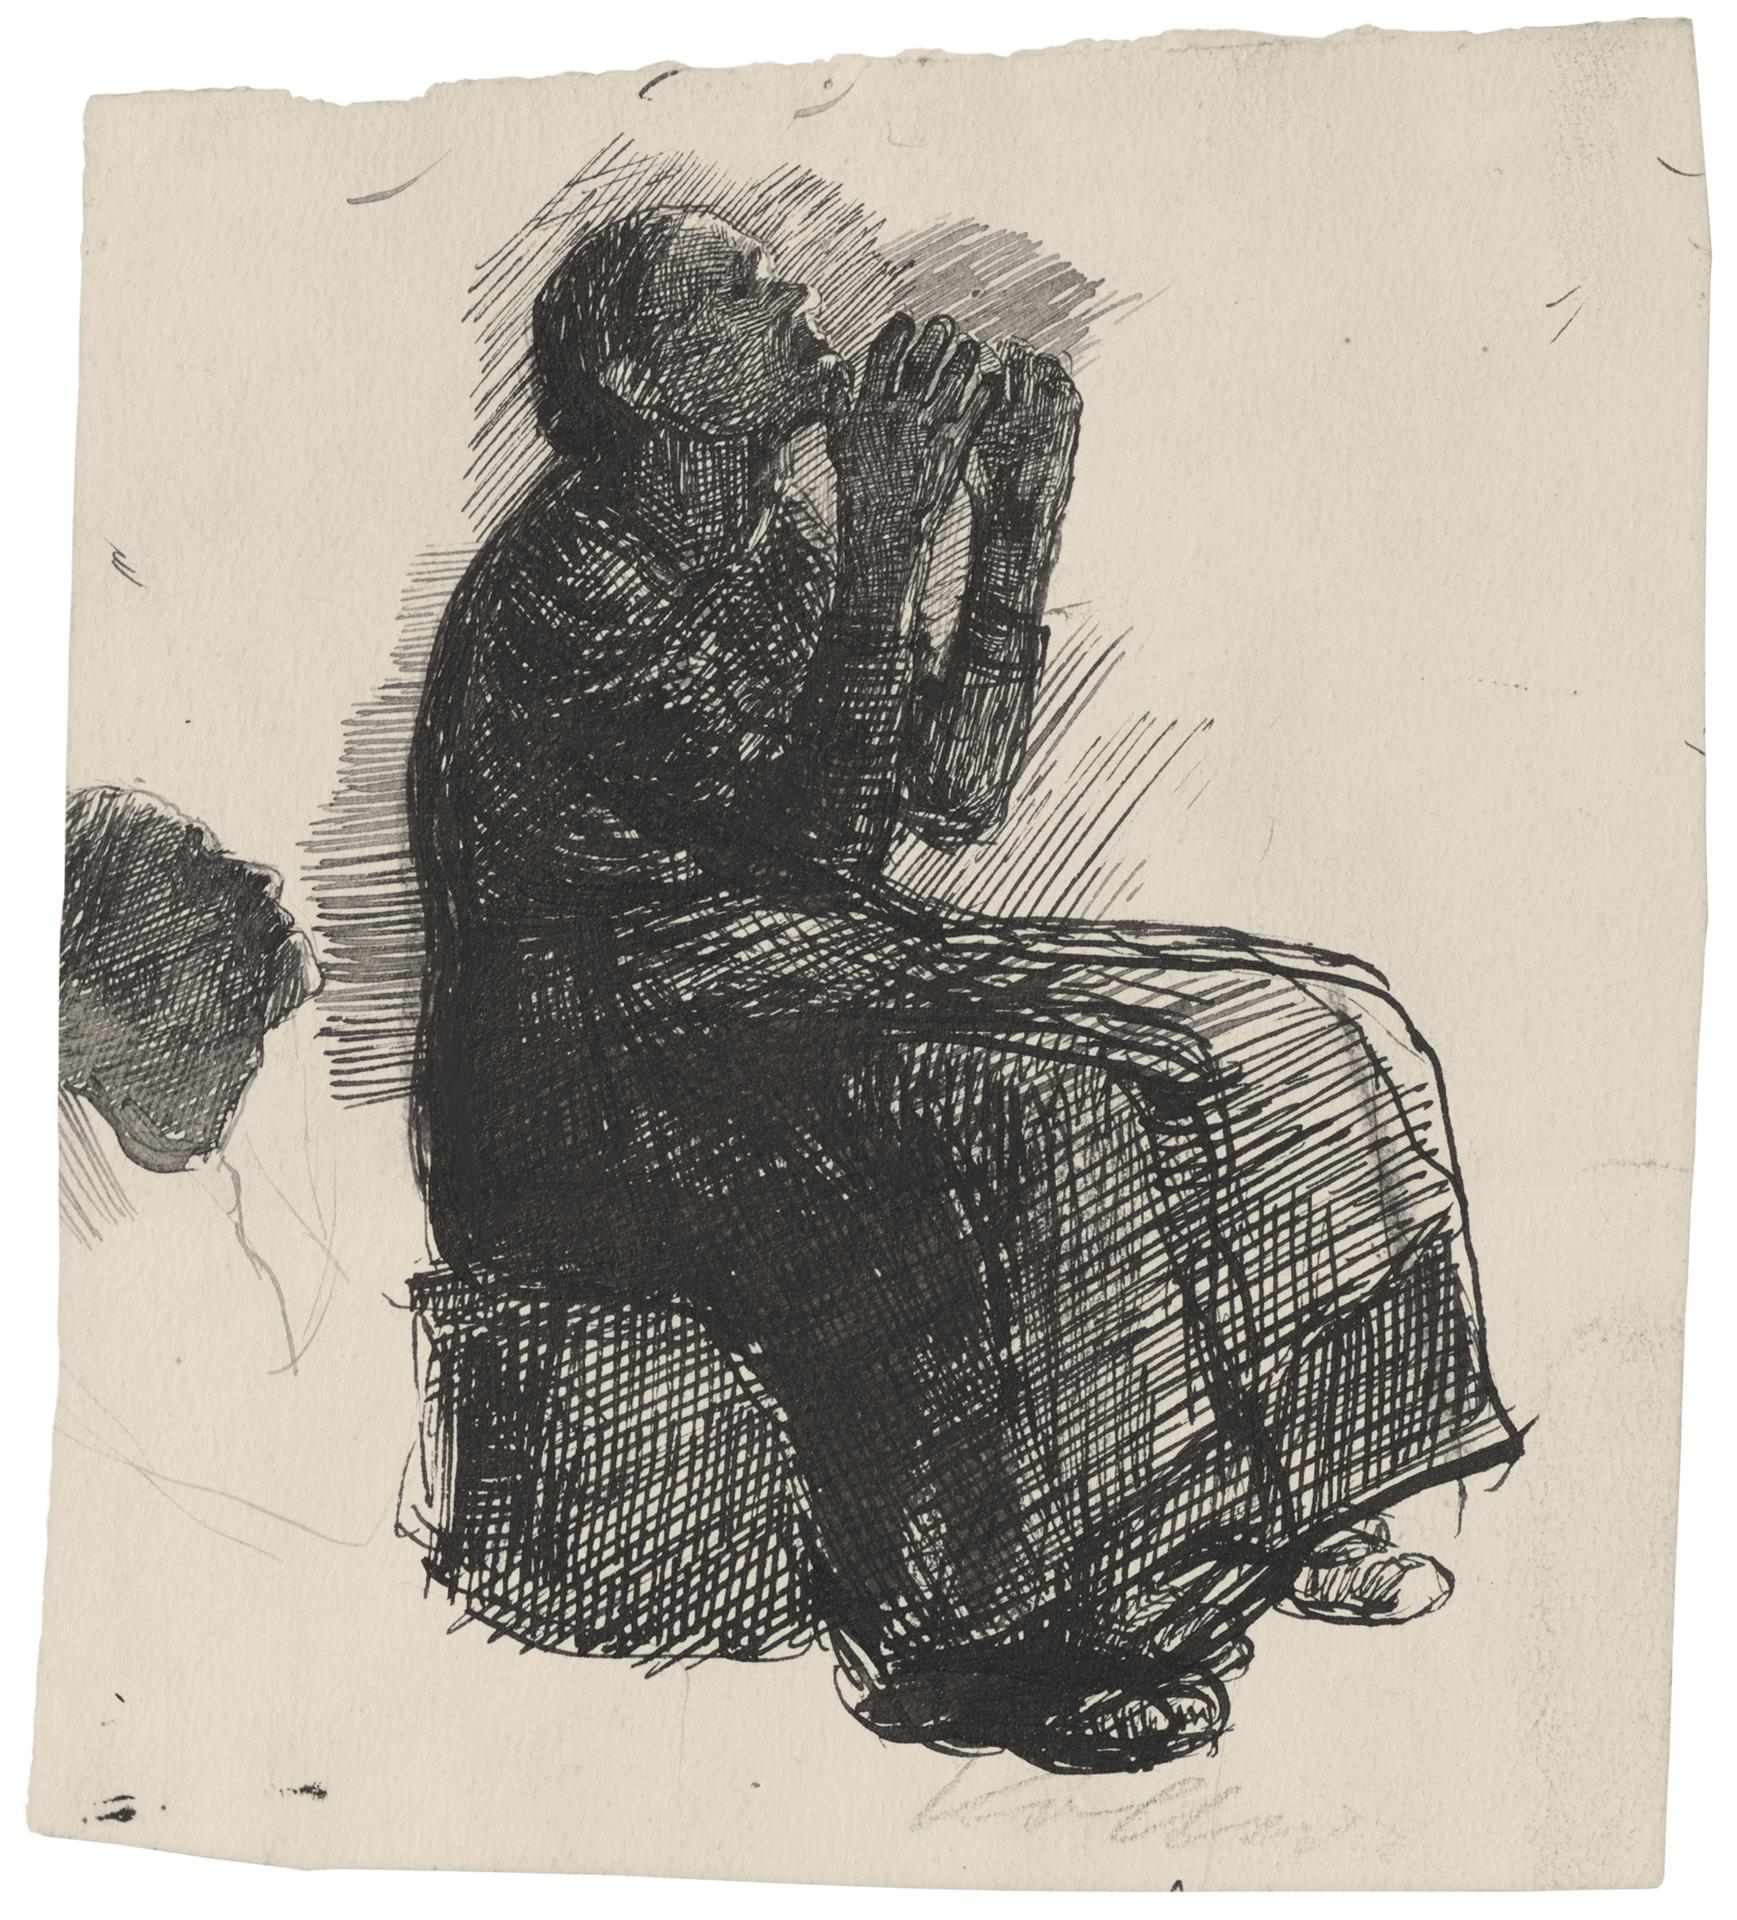 Käthe Kollwitz, Woman, seated, with arms raised in sorrow, detail study for the first version of the lithograph »Need«, 1895, pen and ink, NT 116, Cologne Kollwitz Collection © Käthe Kollwitz Museum Köln